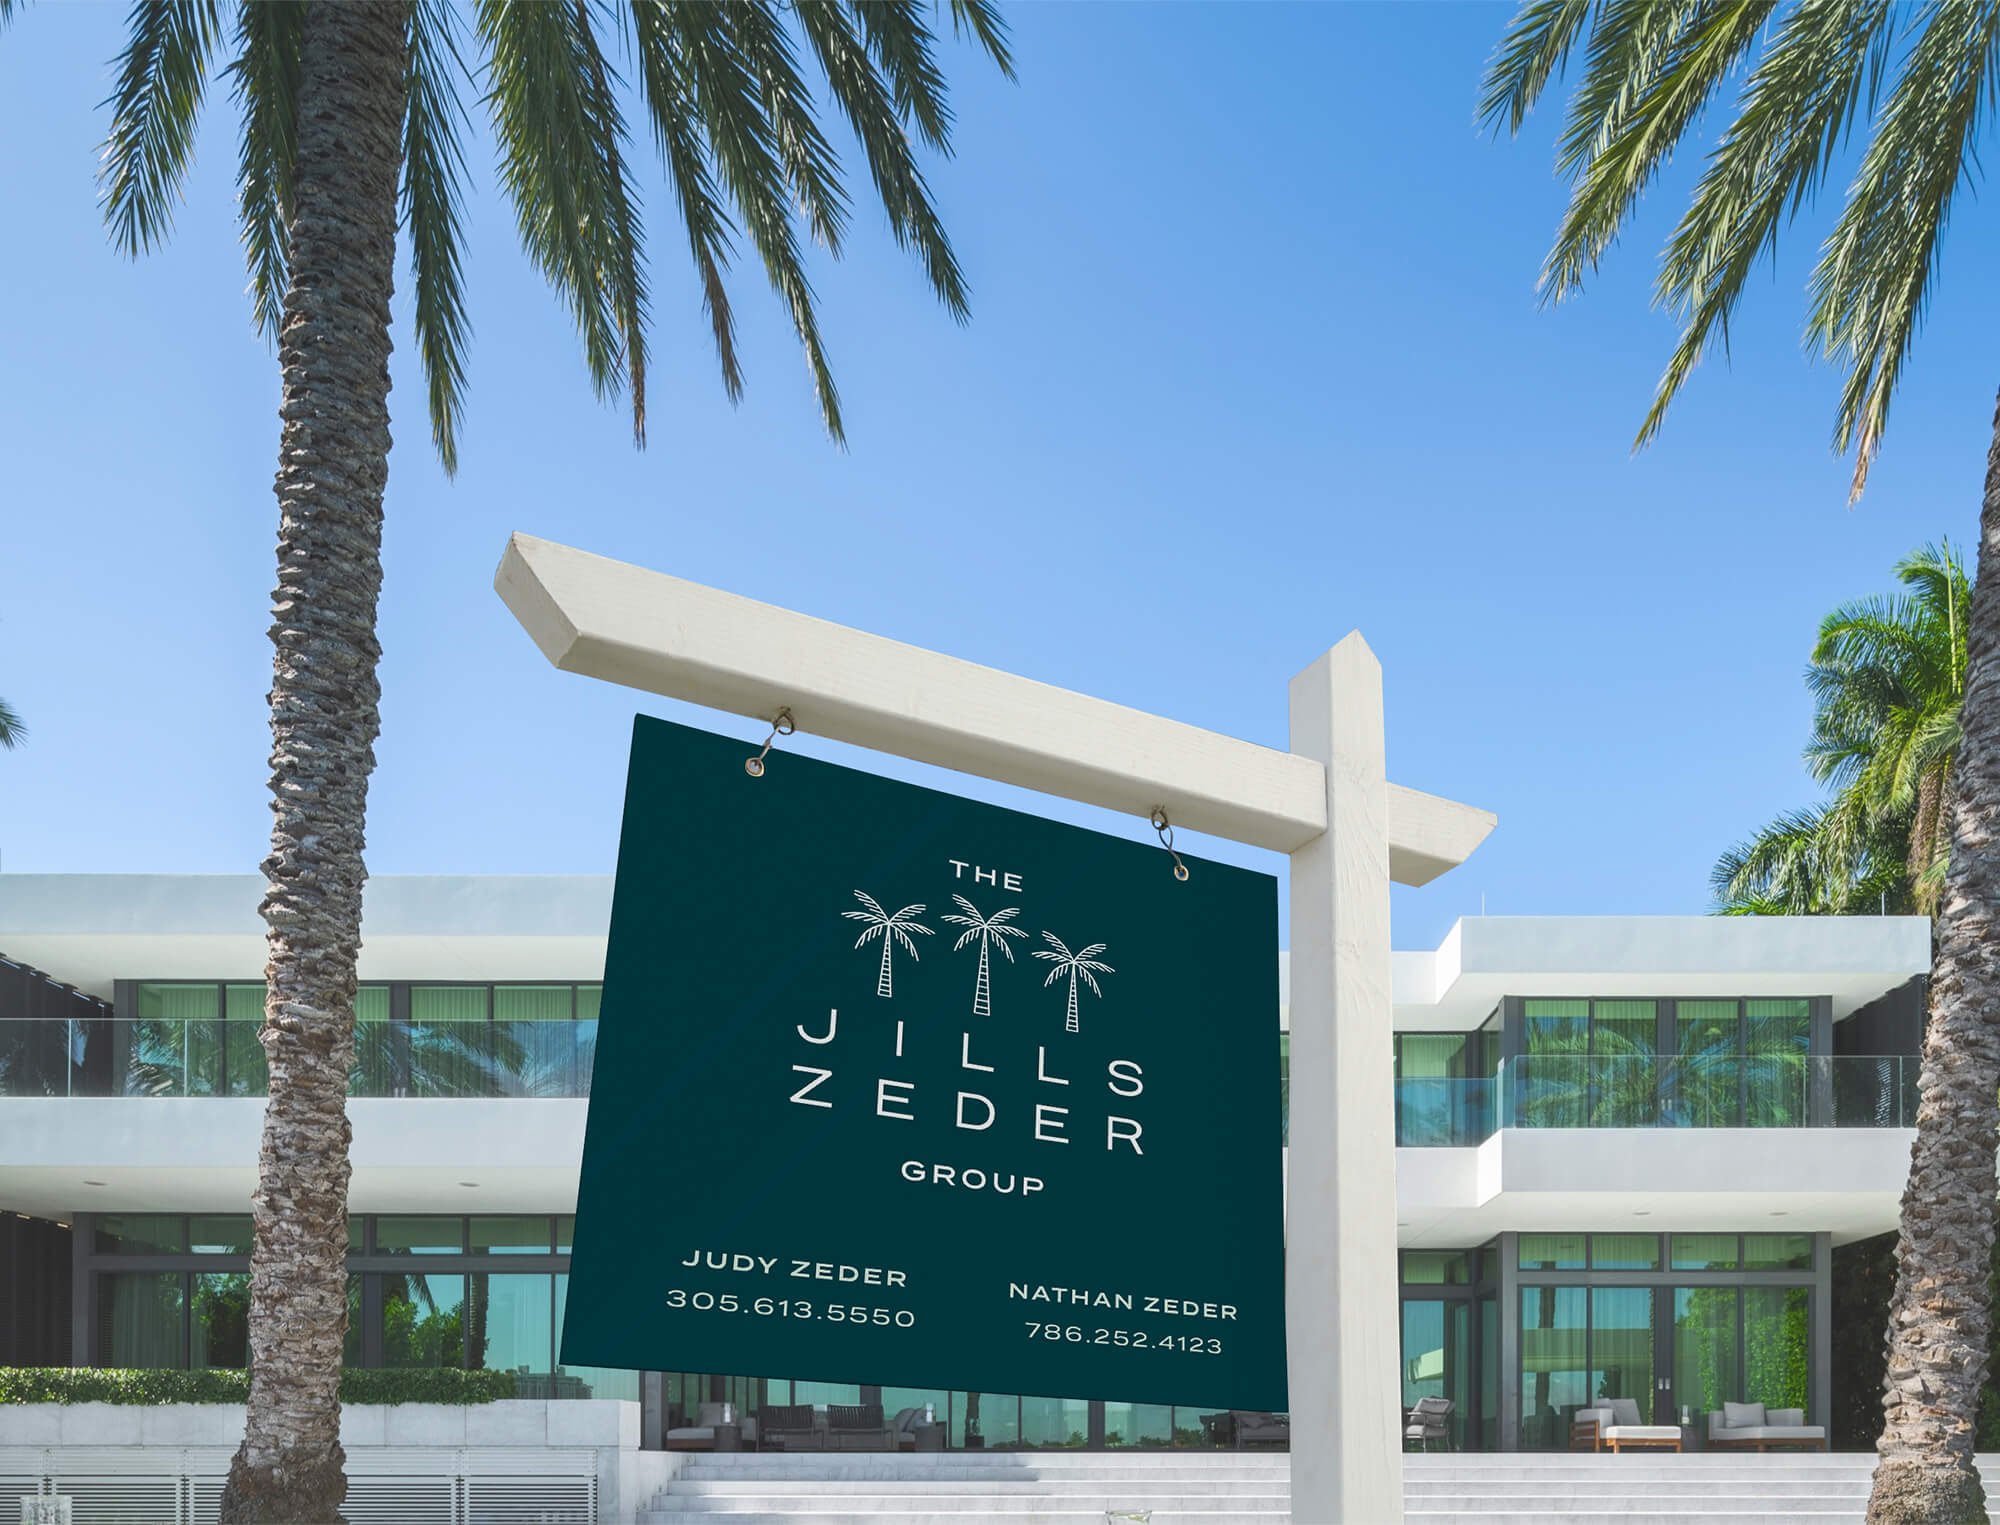 Jacober Creative Brand Identity for The Jills Zeder Group. Signage